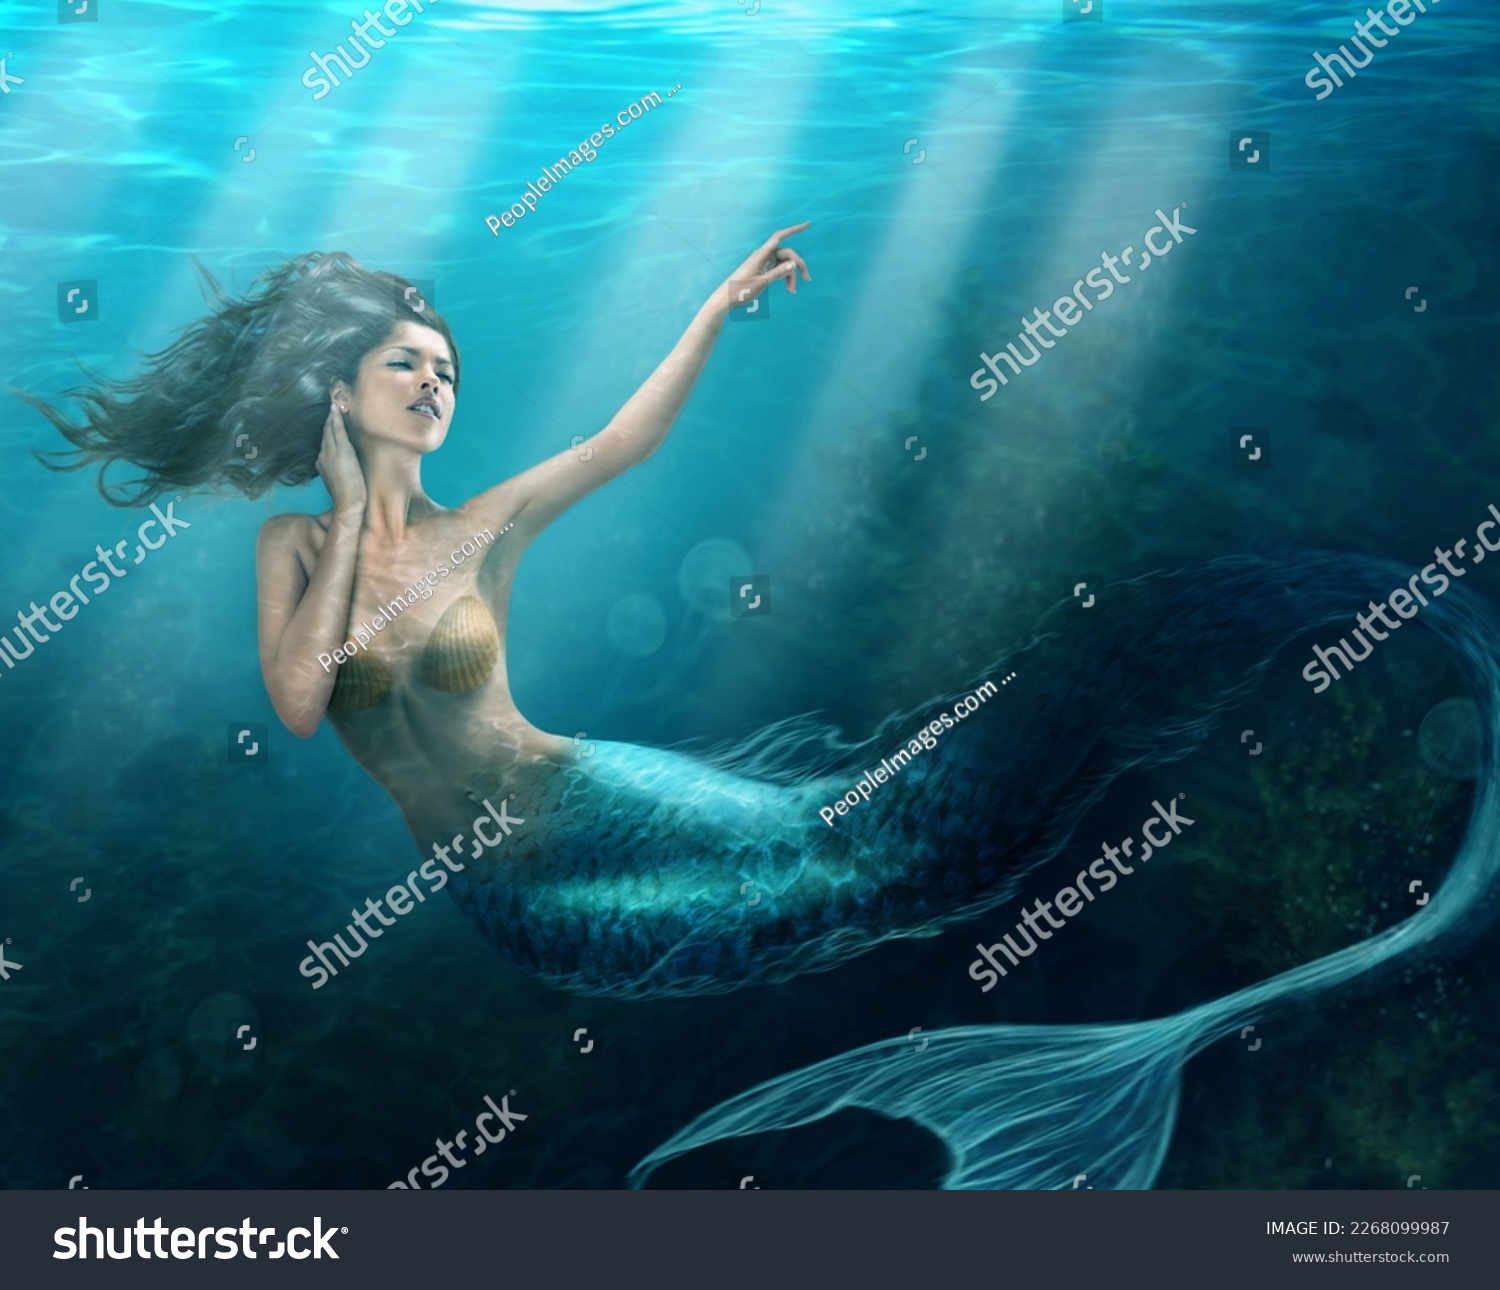 Siren of the sea. Shot of a mermaid swimming in solitude in the deep blue sea - ALL design on this image is created from scratch by Yuri Arcurs team of professionals for this particular photo shoot. #2268099987